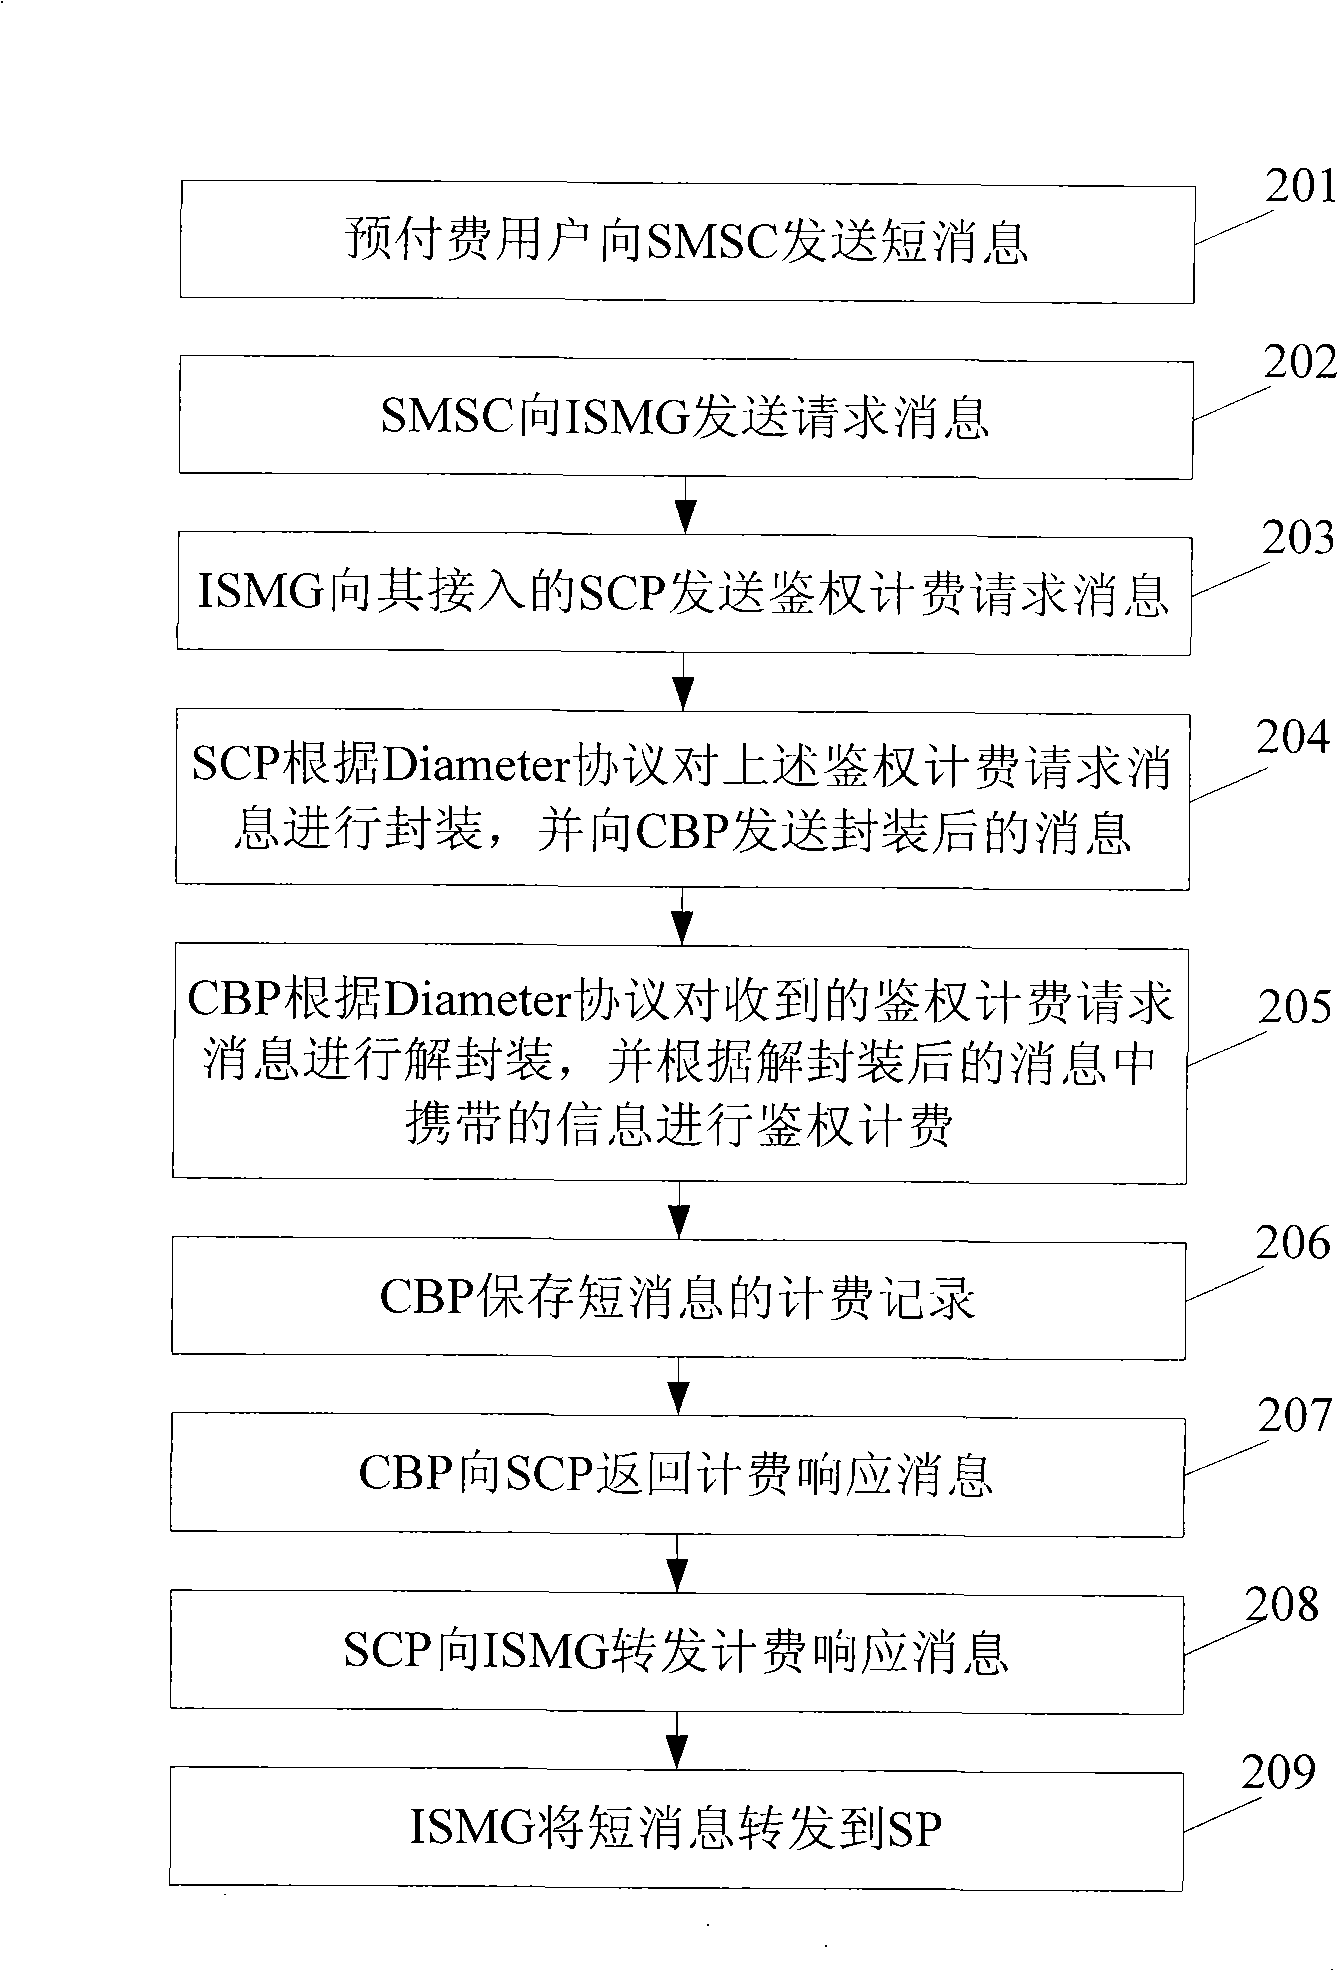 On-line charging method, service control point, amalgamation charging point and system